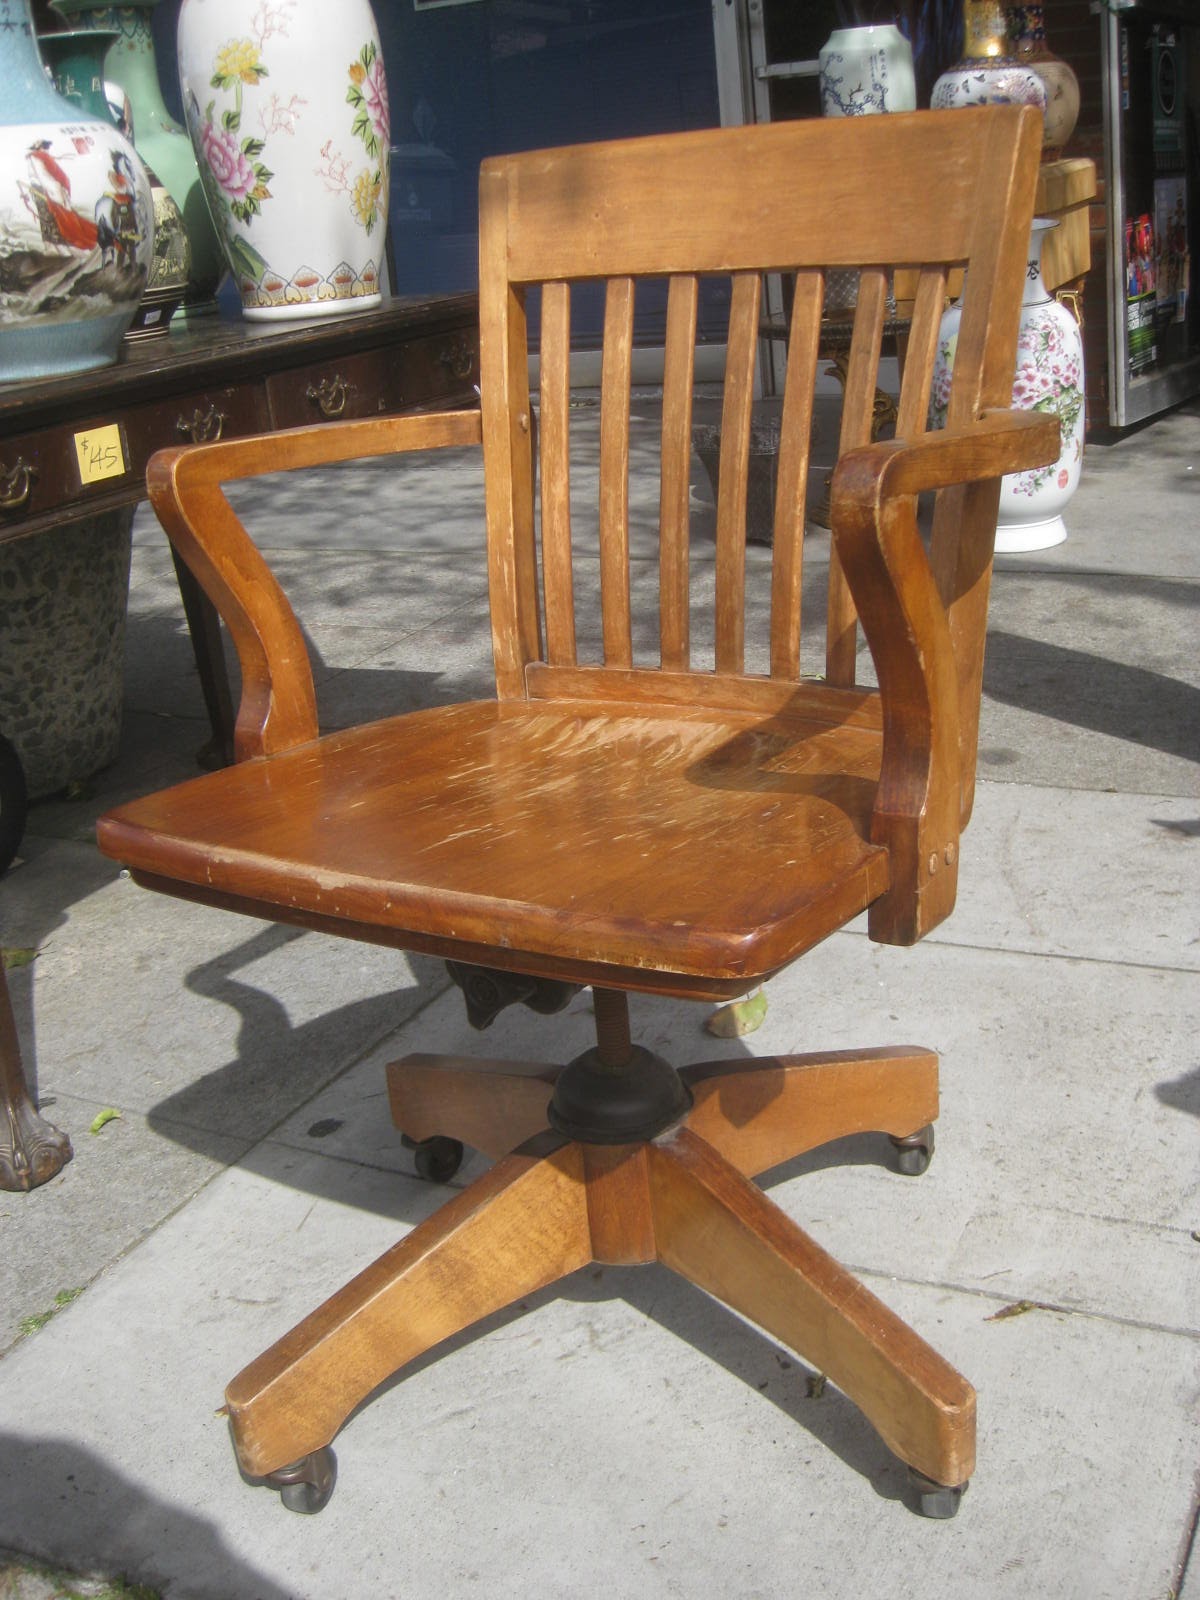 UHURU FURNITURE & COLLECTIBLES: SOLD - Wooden Office Chair - $60